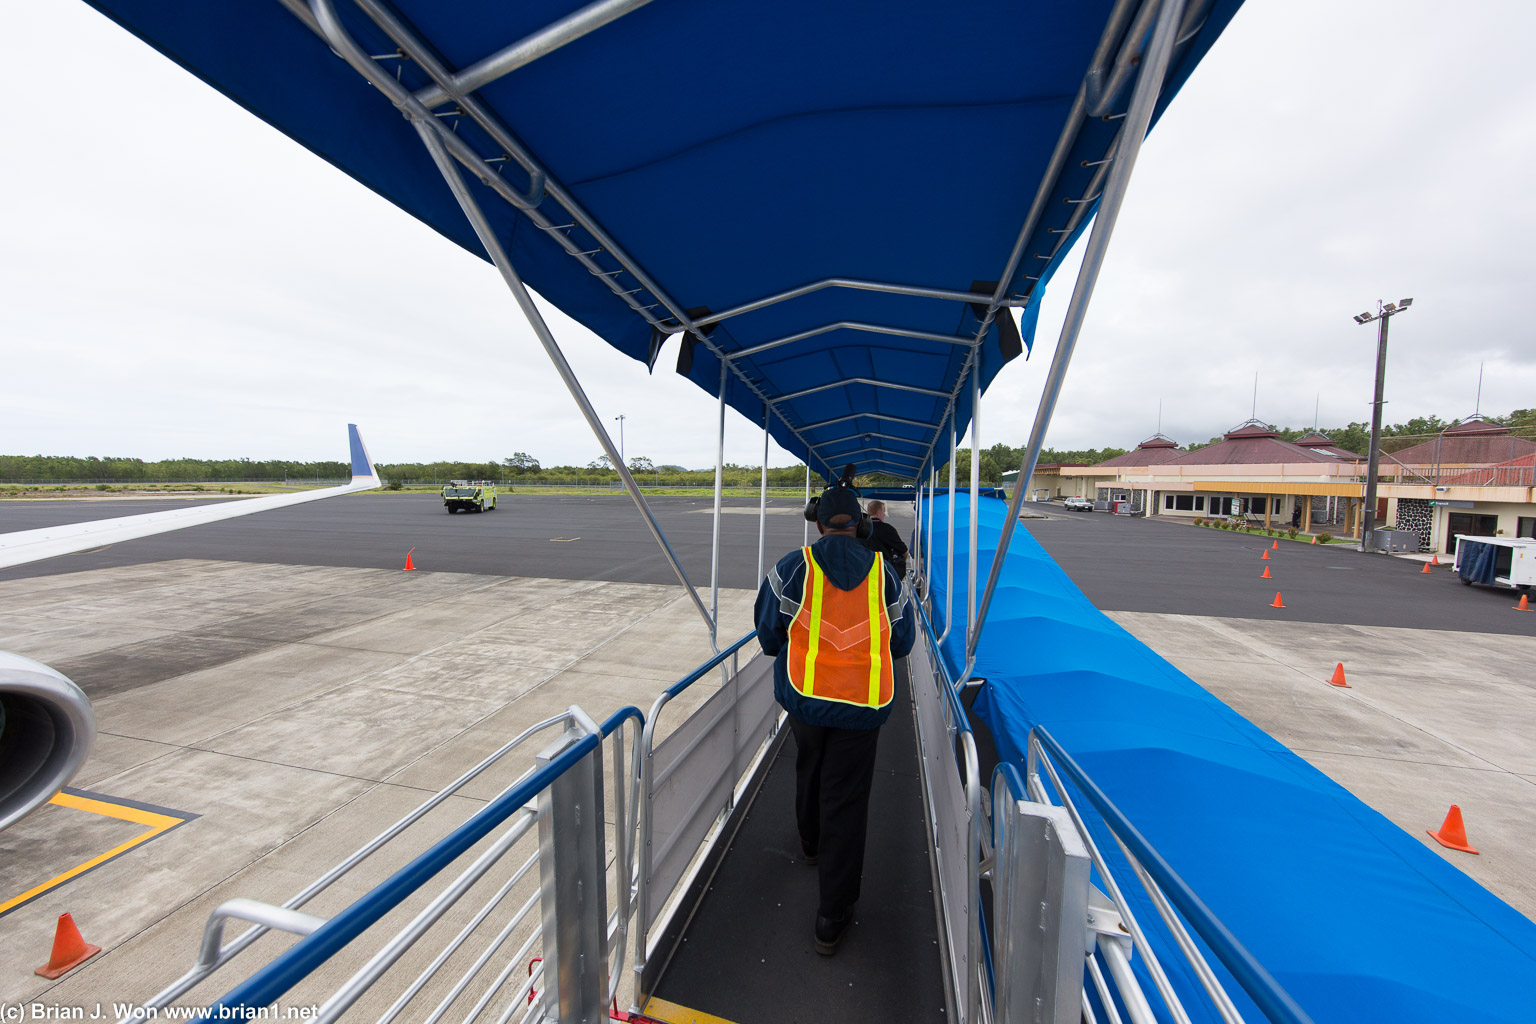 Getting off the plane at Pohnpei.